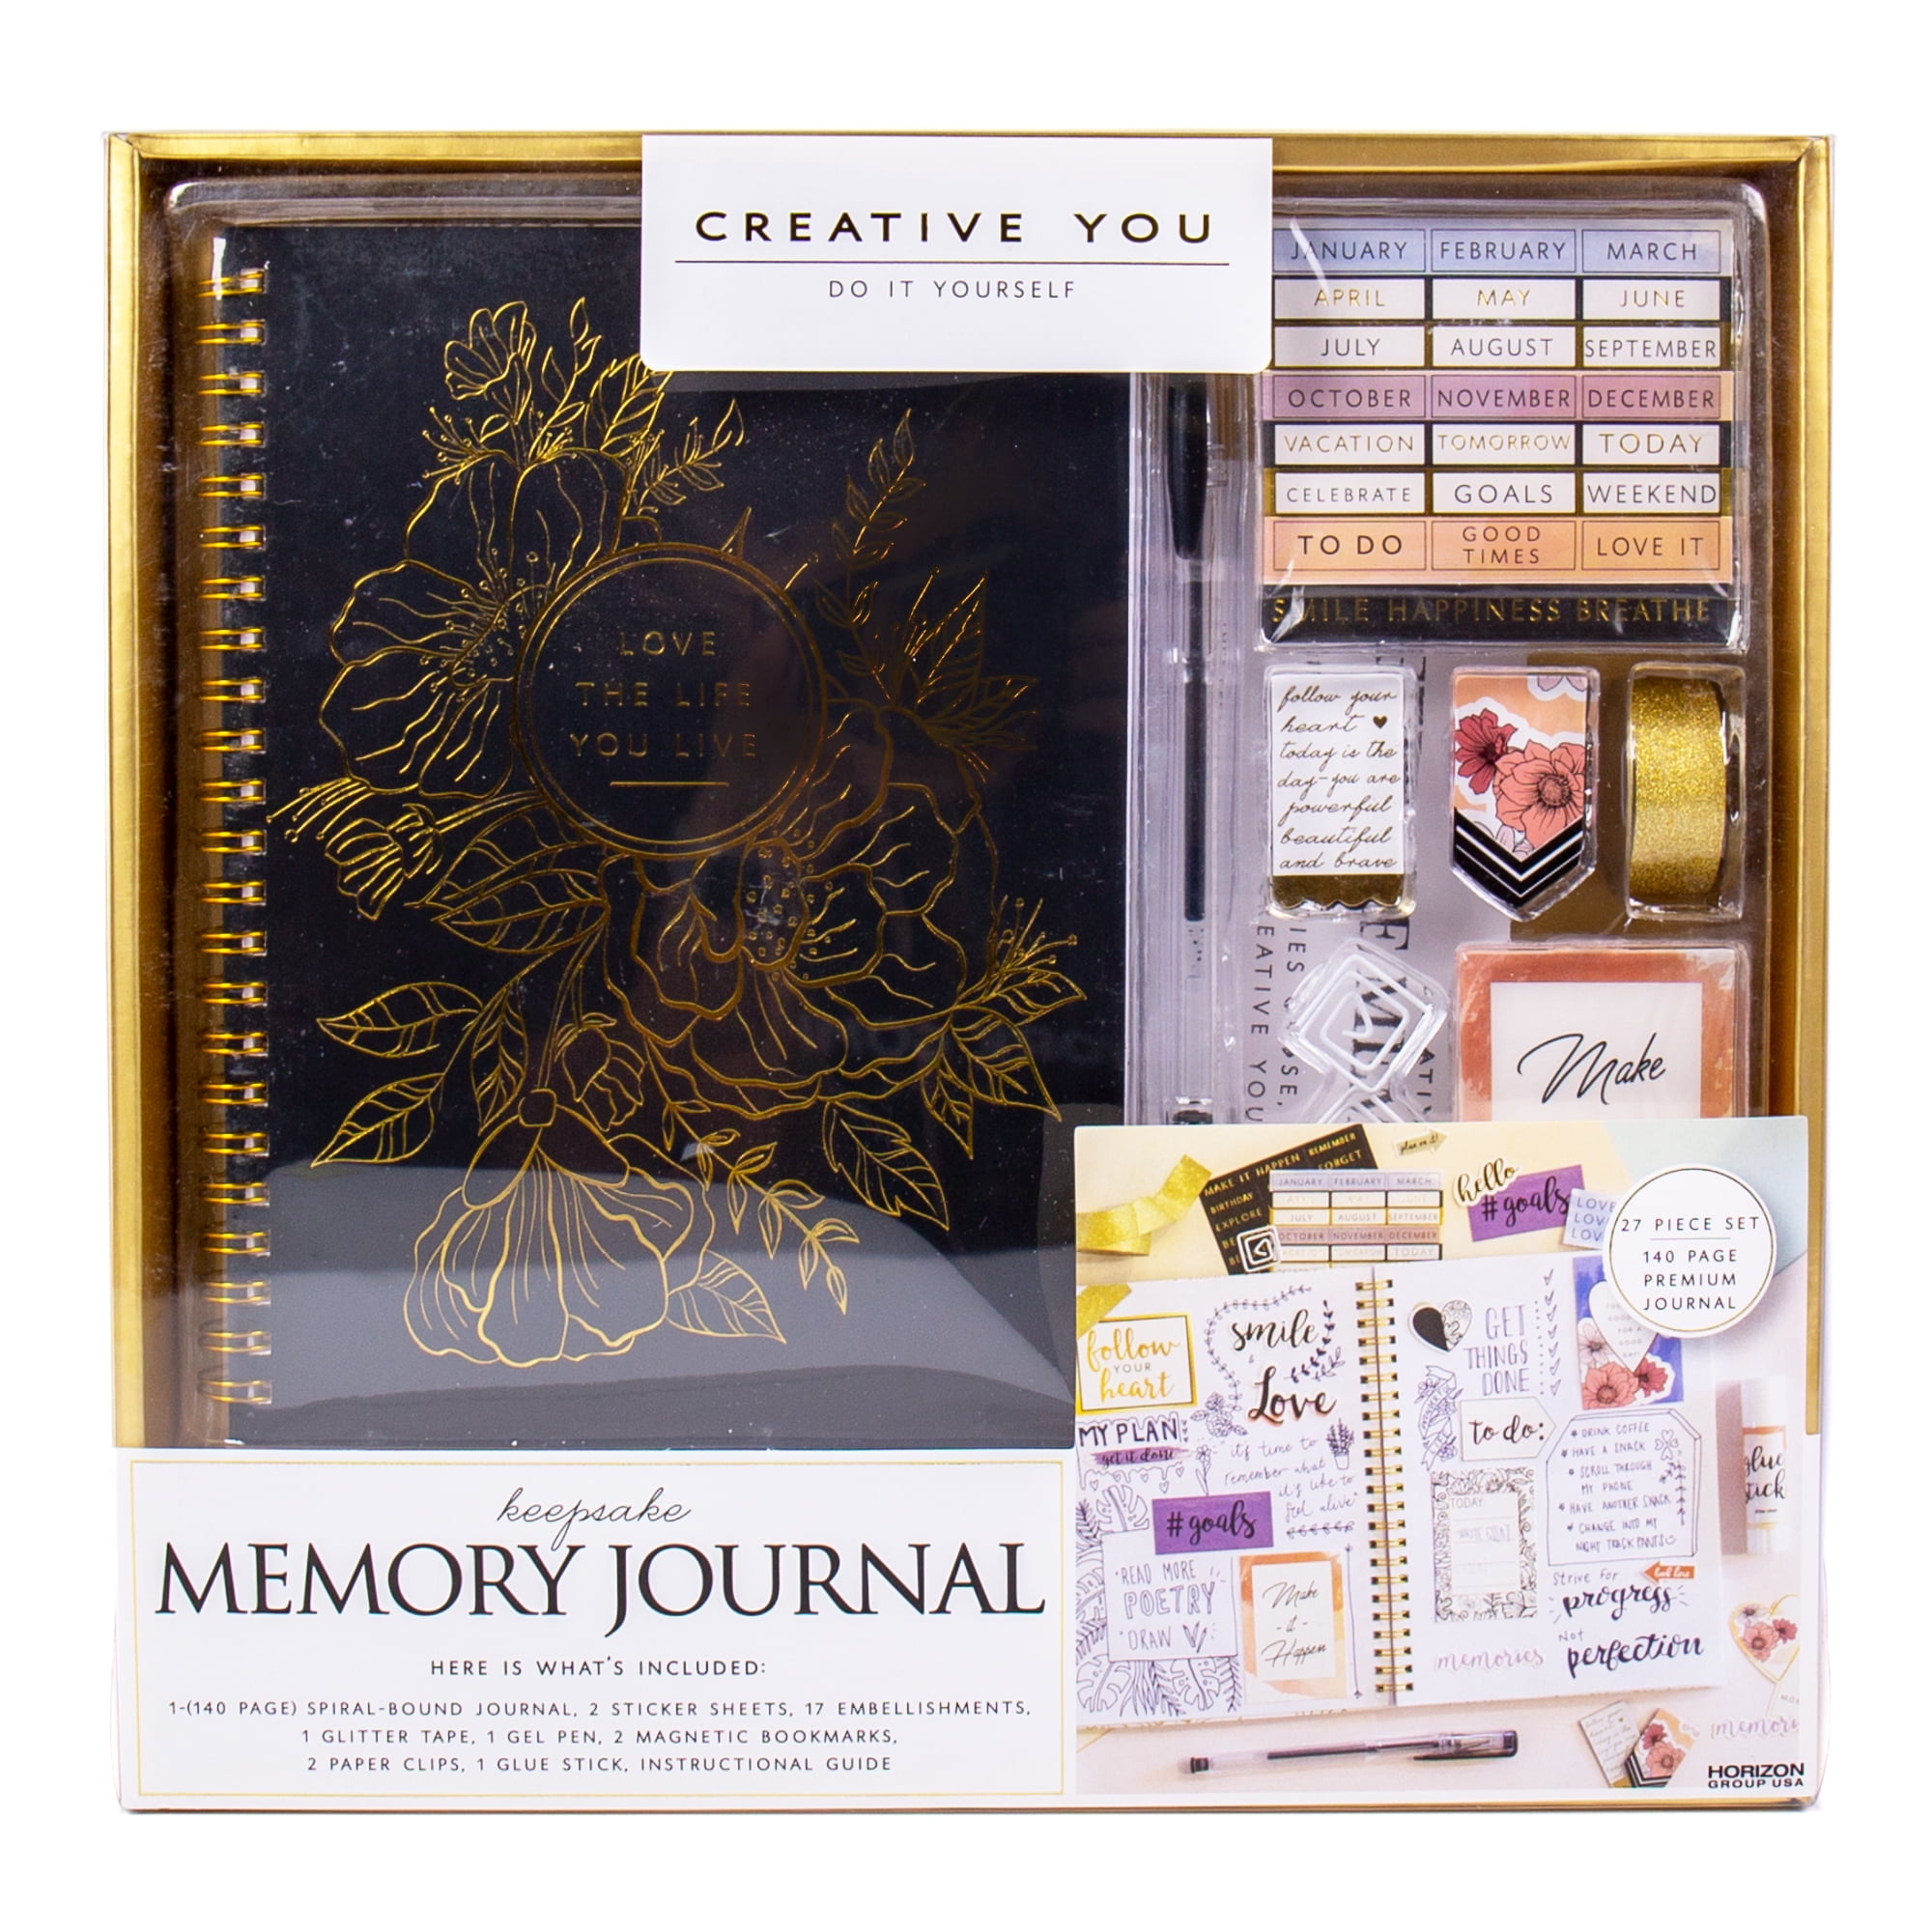 Creative You Keepsake Memory Journal Set, 140 Pages, 27 Pieces